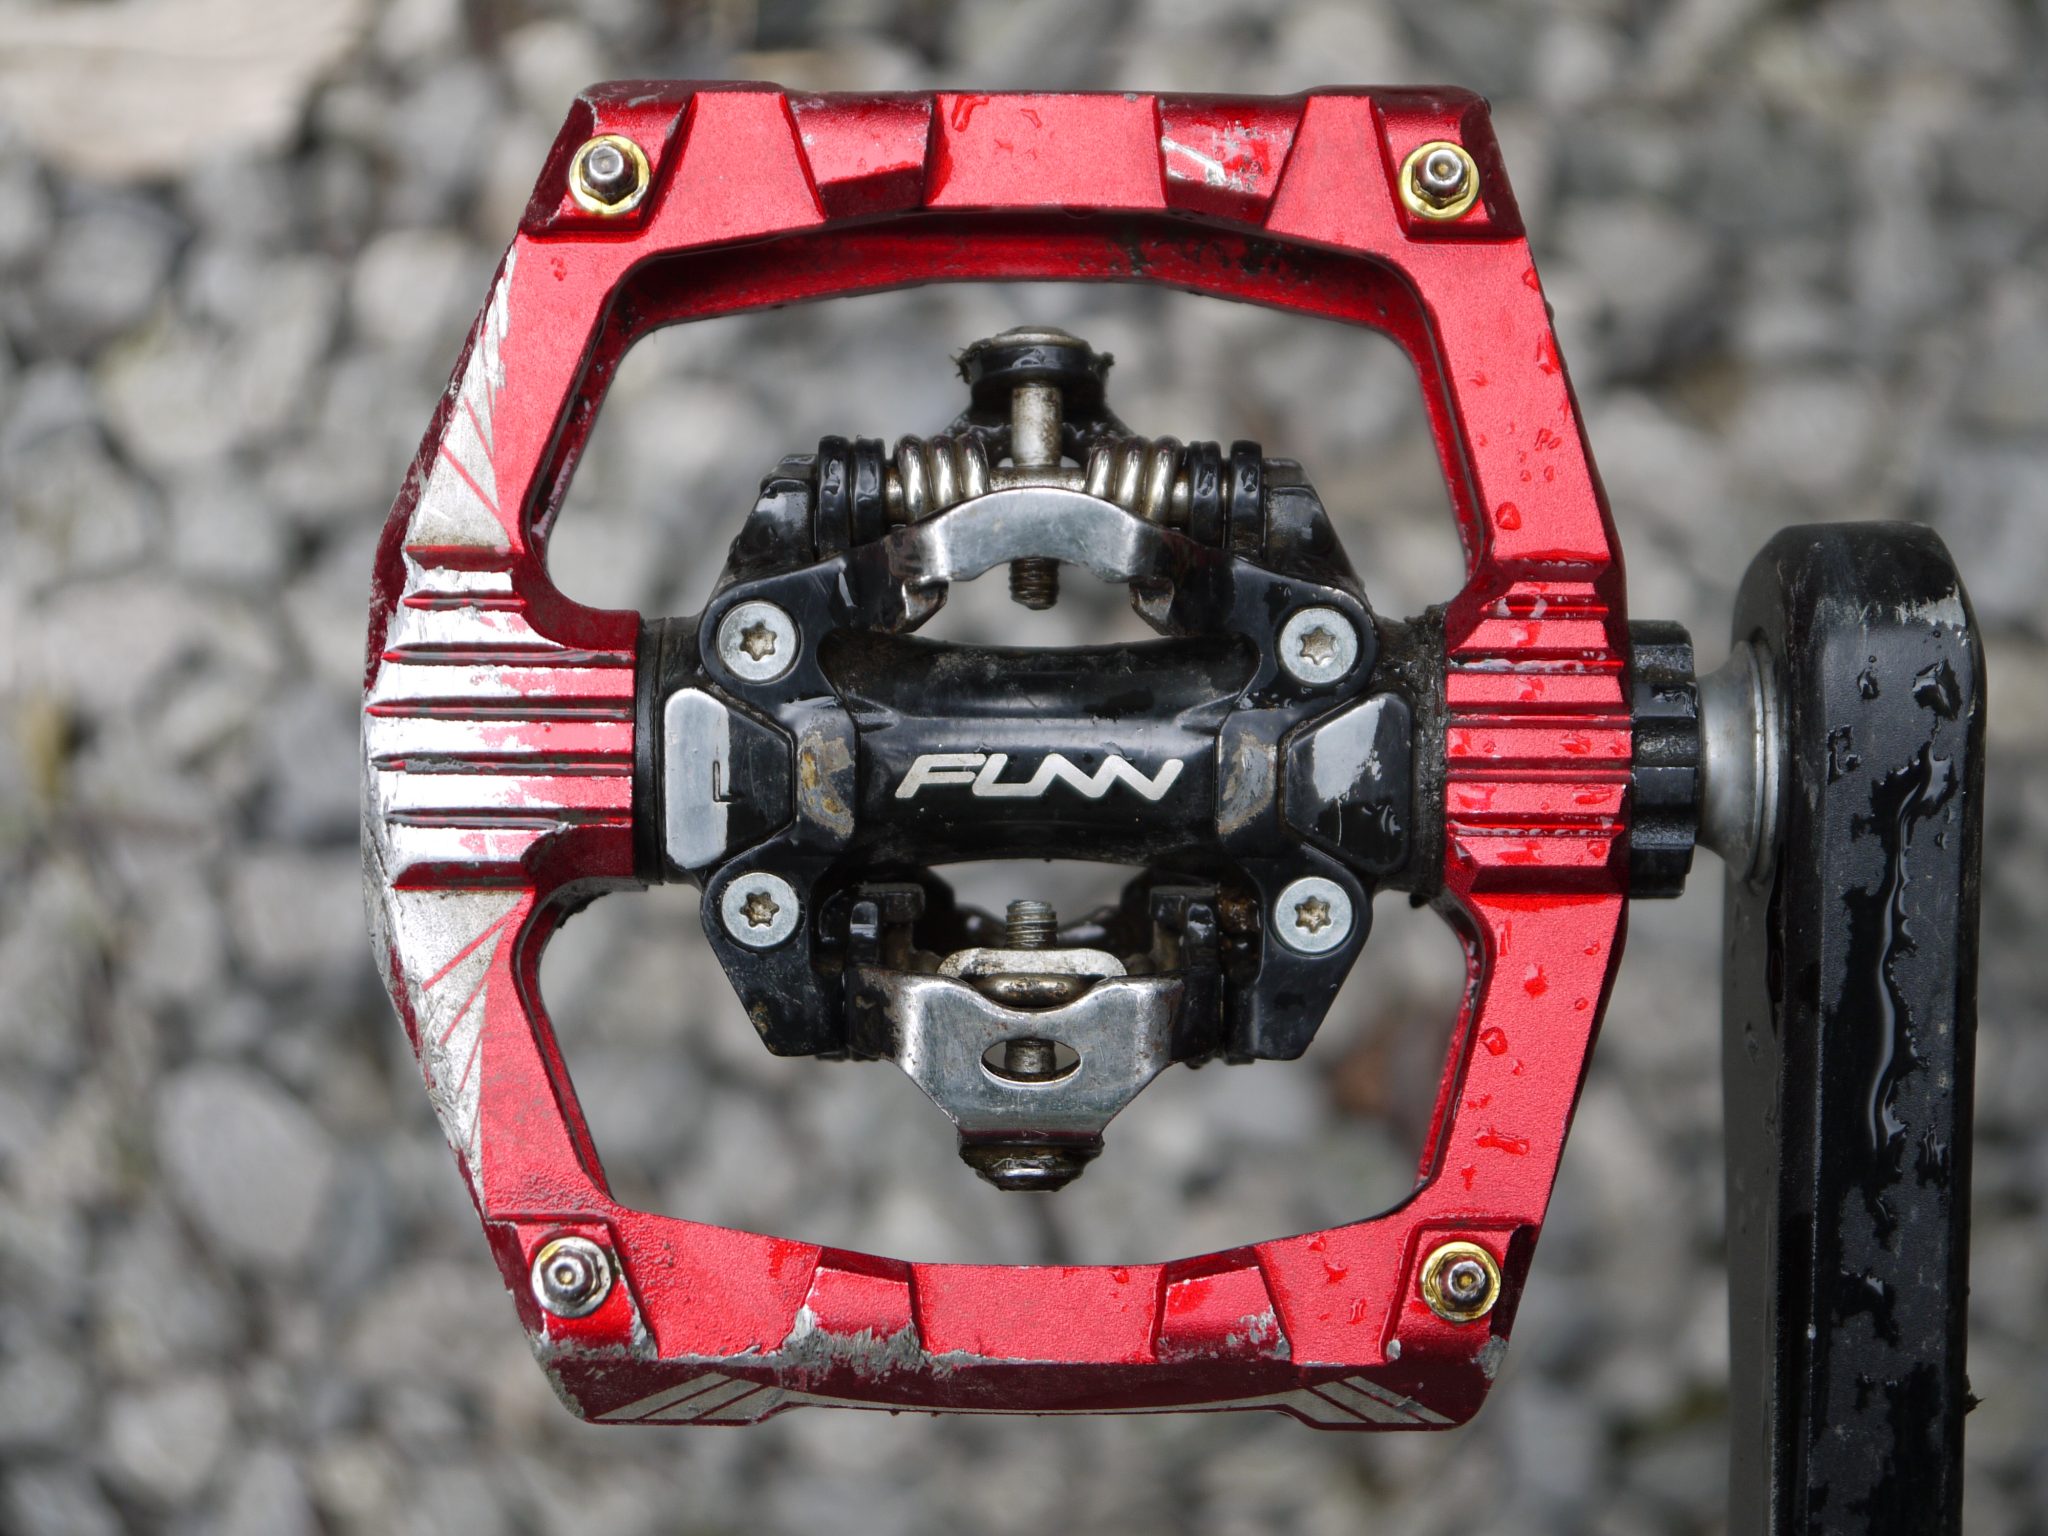 FUNN Ripper Pedals 2018, Mountain Bike Reviews » Components » Pedals, Free Mountain Bike Magazine